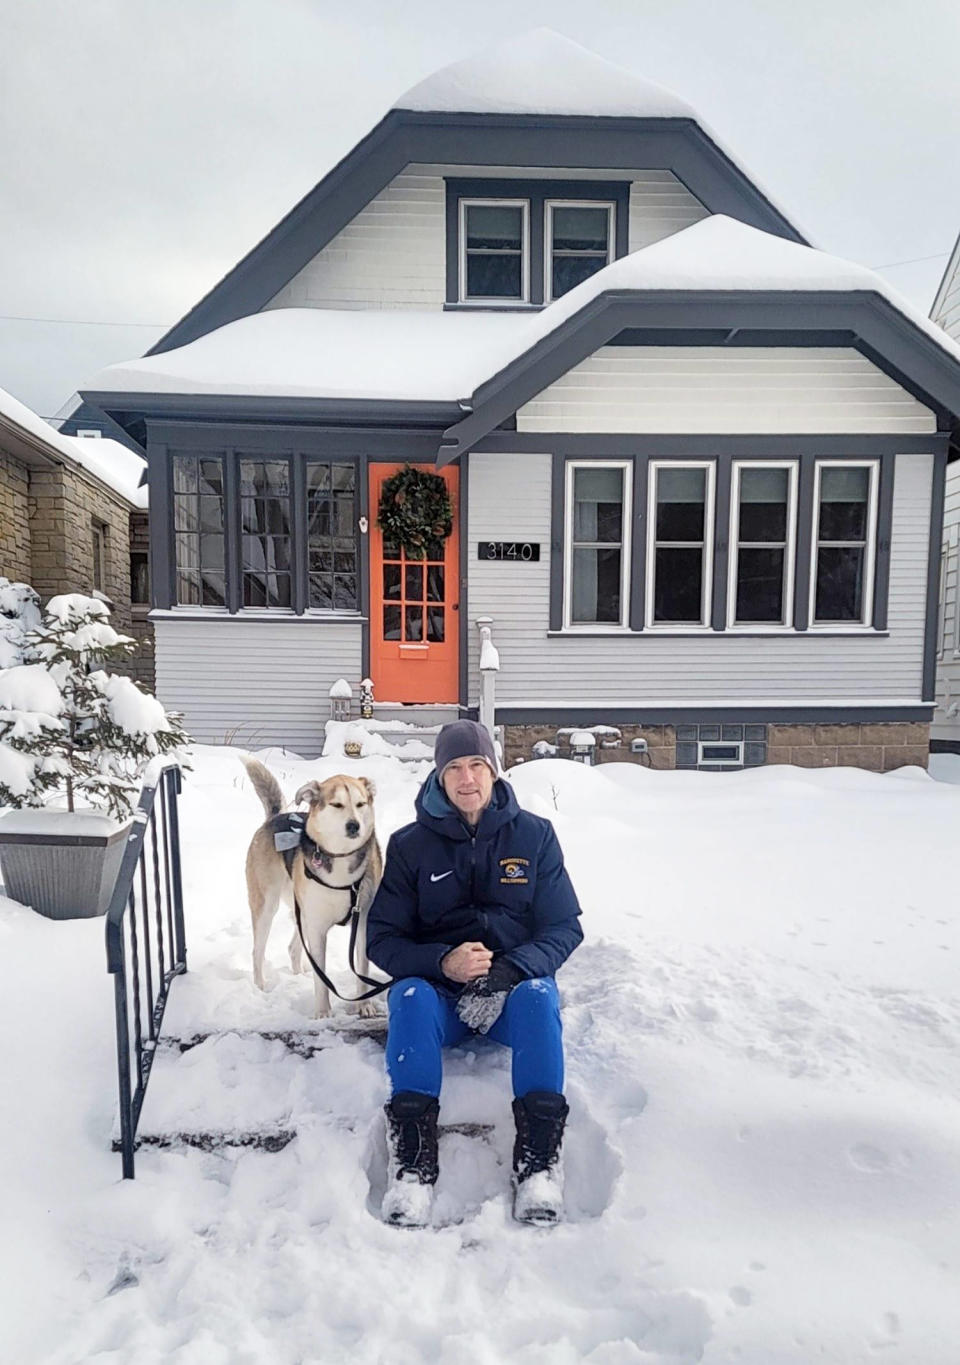 Jeff and his dog. (Courtesy Jeff and Connie Bolle)